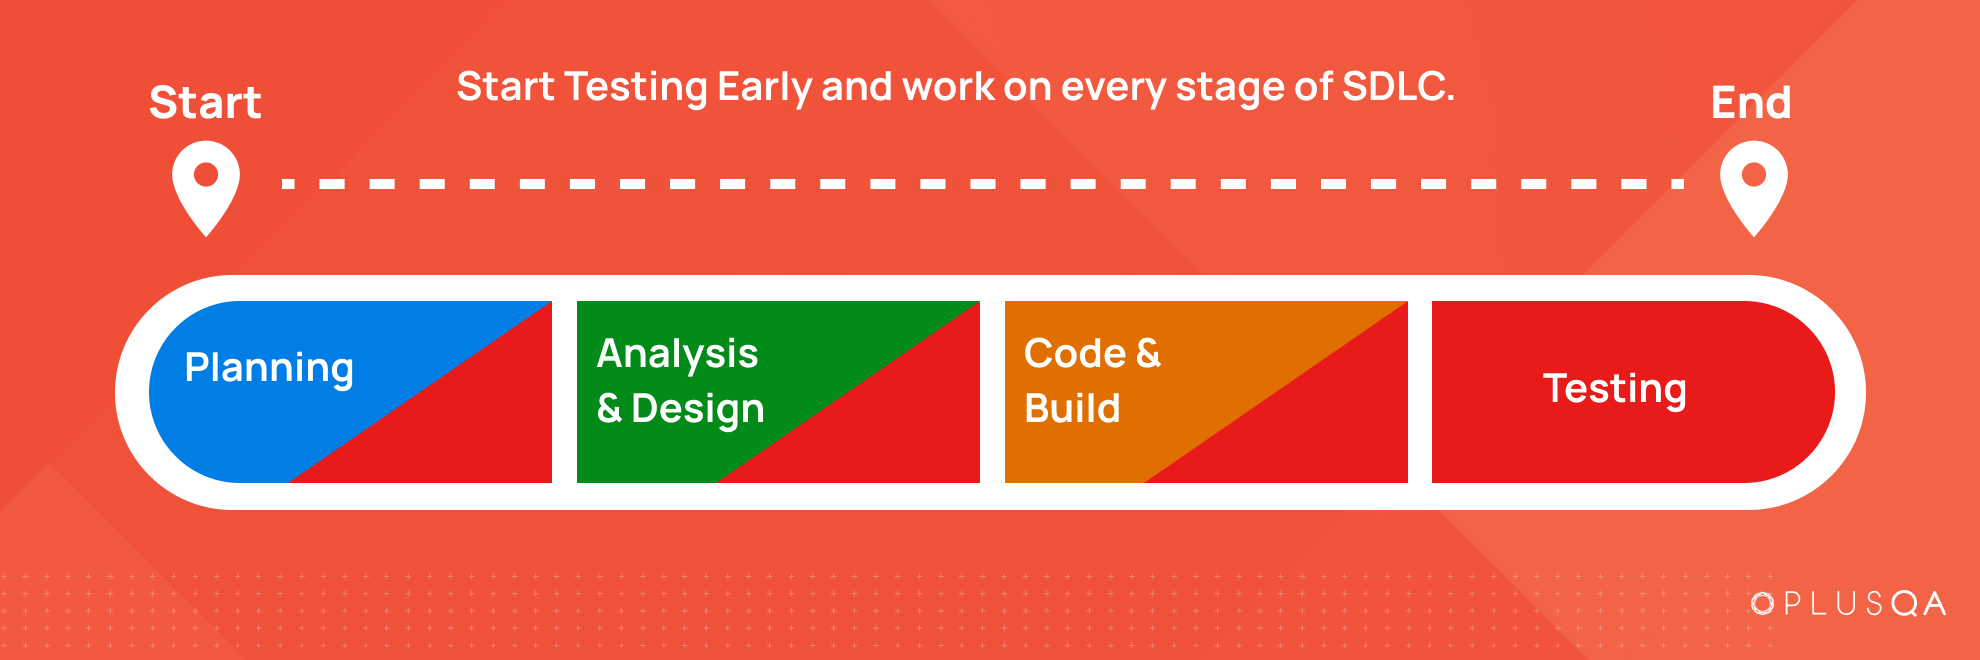 Graphic demonstrating starting testing early and work on every stage of SDLC. It shows a start pin on the Planning section, with a dotted line showing the testing continuing through the Analysis & Design section and the Code & Build section until ending at the Testing section.